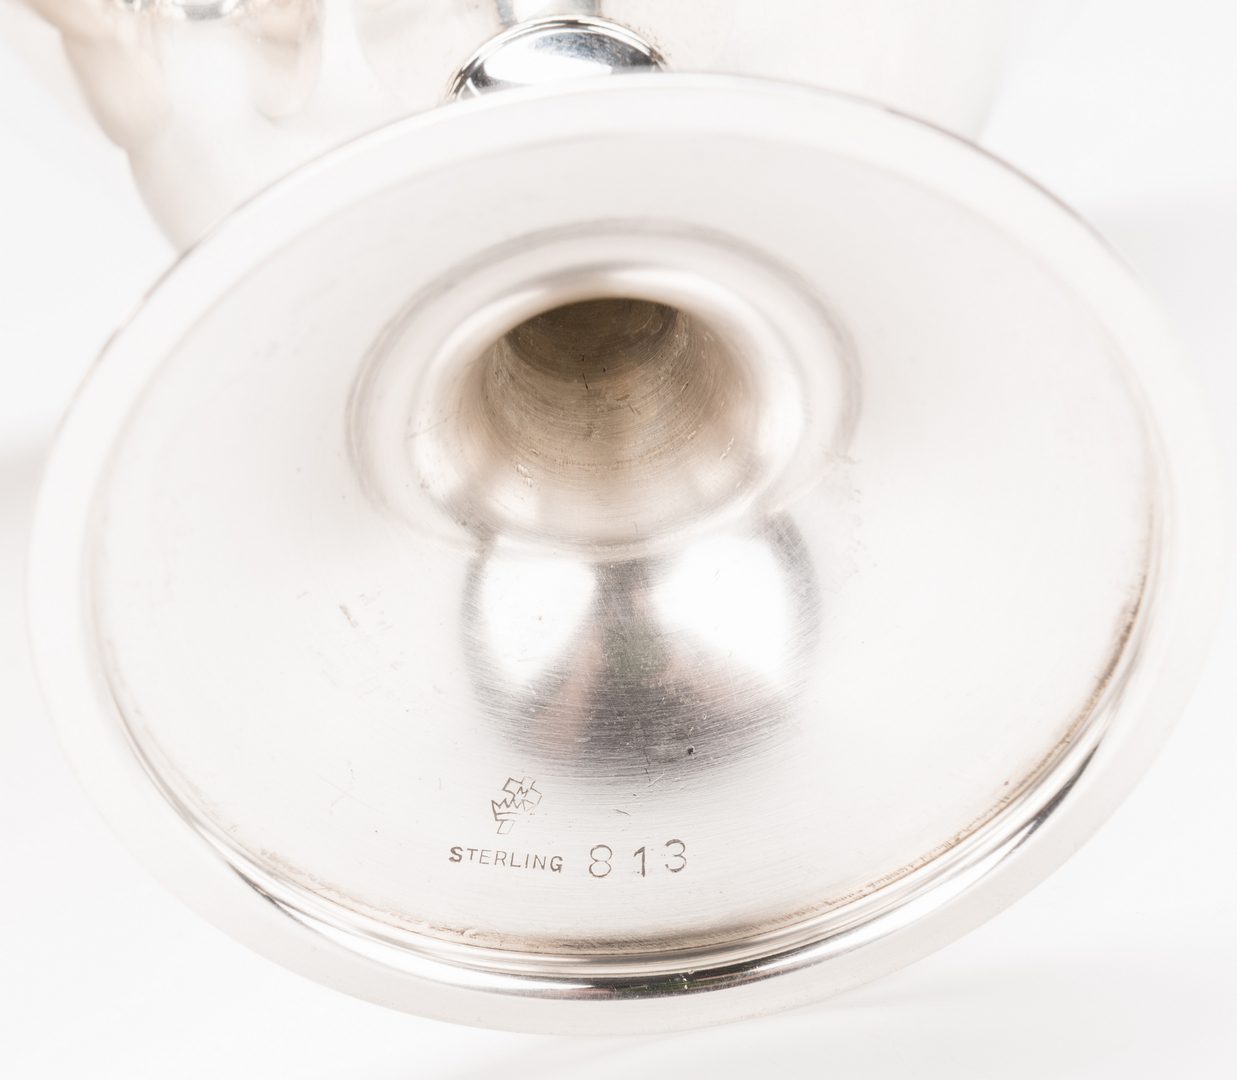 Lot 586: 10 Manchester Sterling Champagne or Sherbets